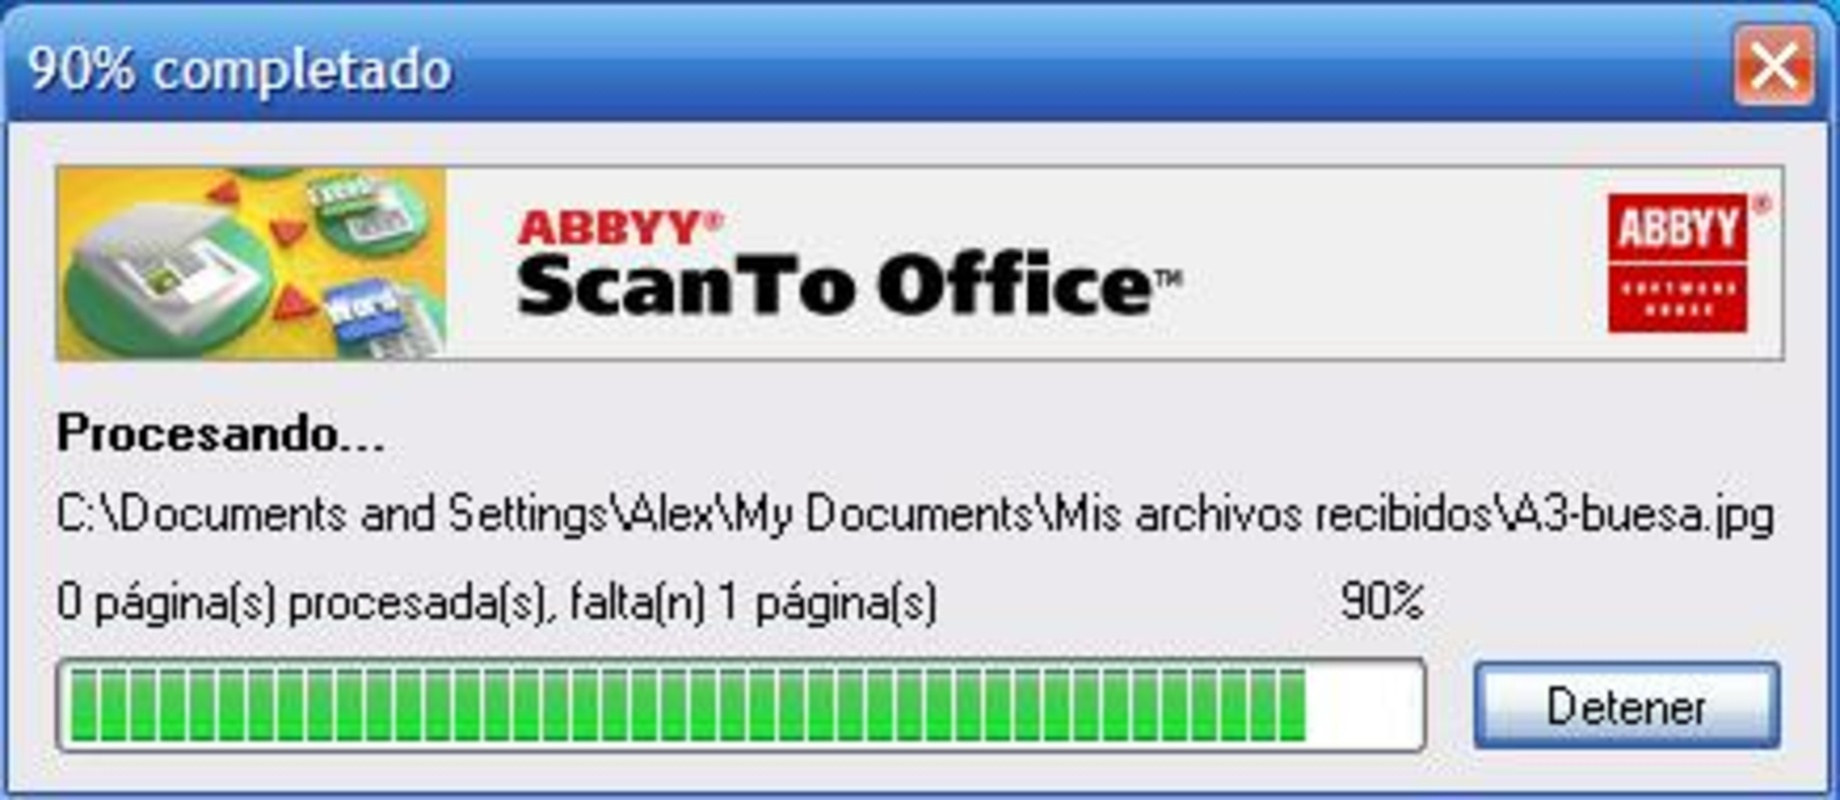 ABBYY ScanTo Office 1.0 feature